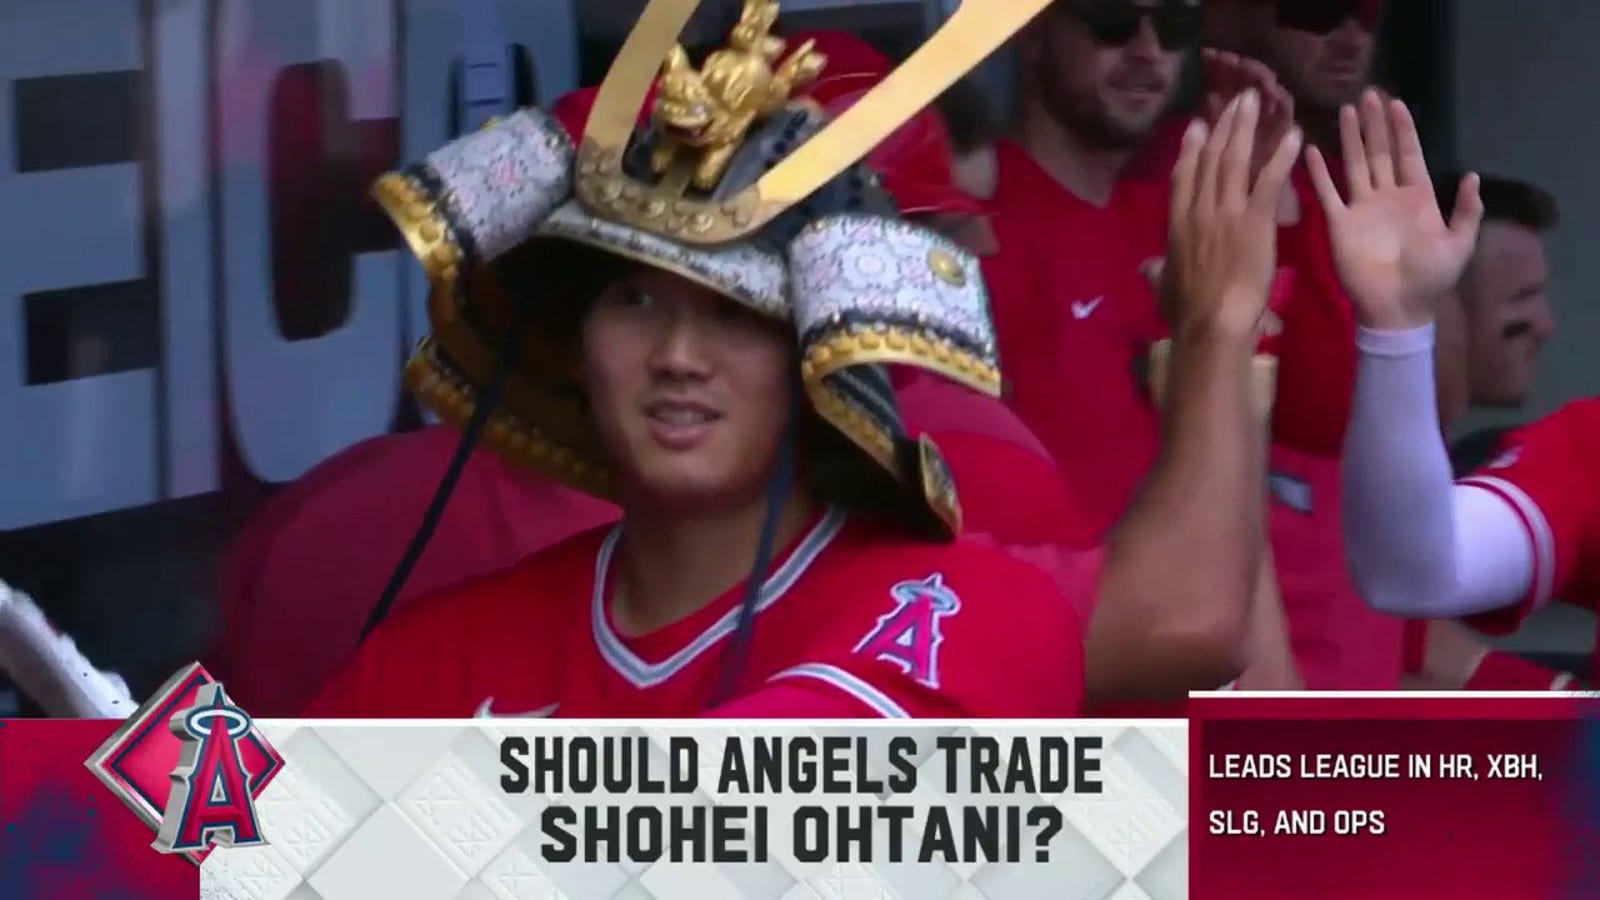 Will the Angels trade Shohei Ohtani?